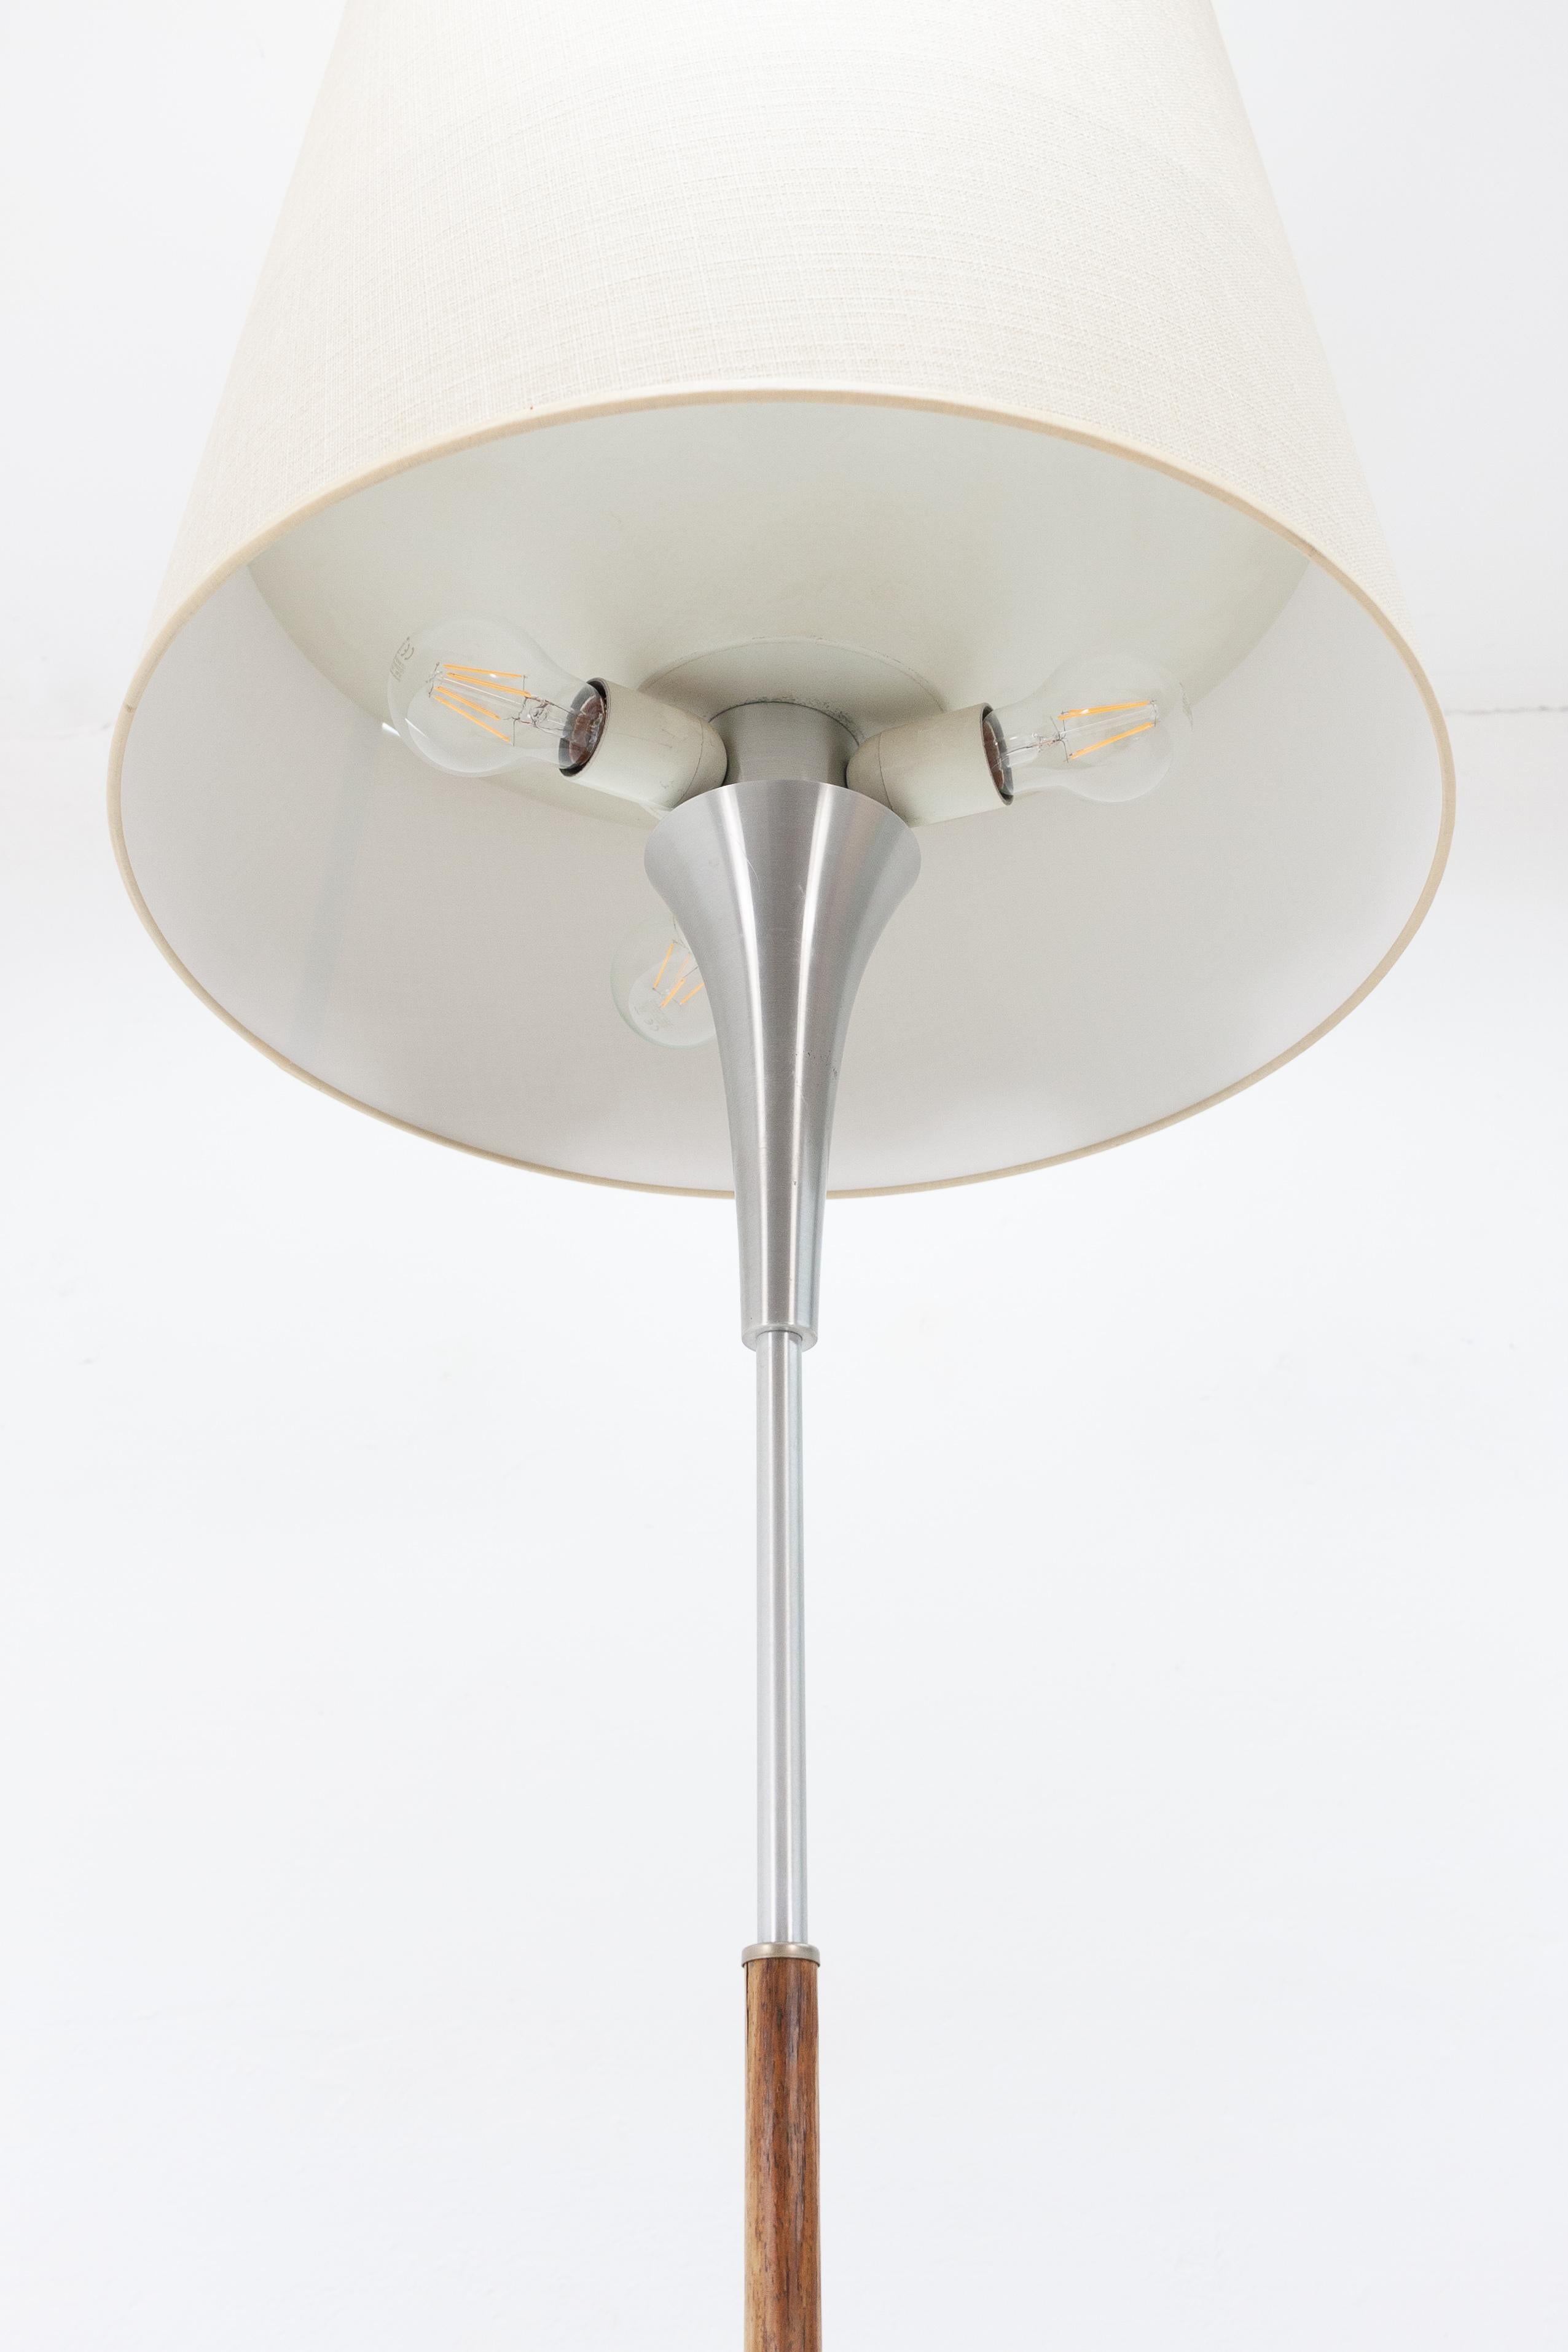 Superb floor lamp. Dijkstra, Holland, 1970s, aluminium base with new fabric hood. The lighting is divided into two sections, an upper half which spreads light upwards using a reflector dividing the hood horizontally and three downwards-facing